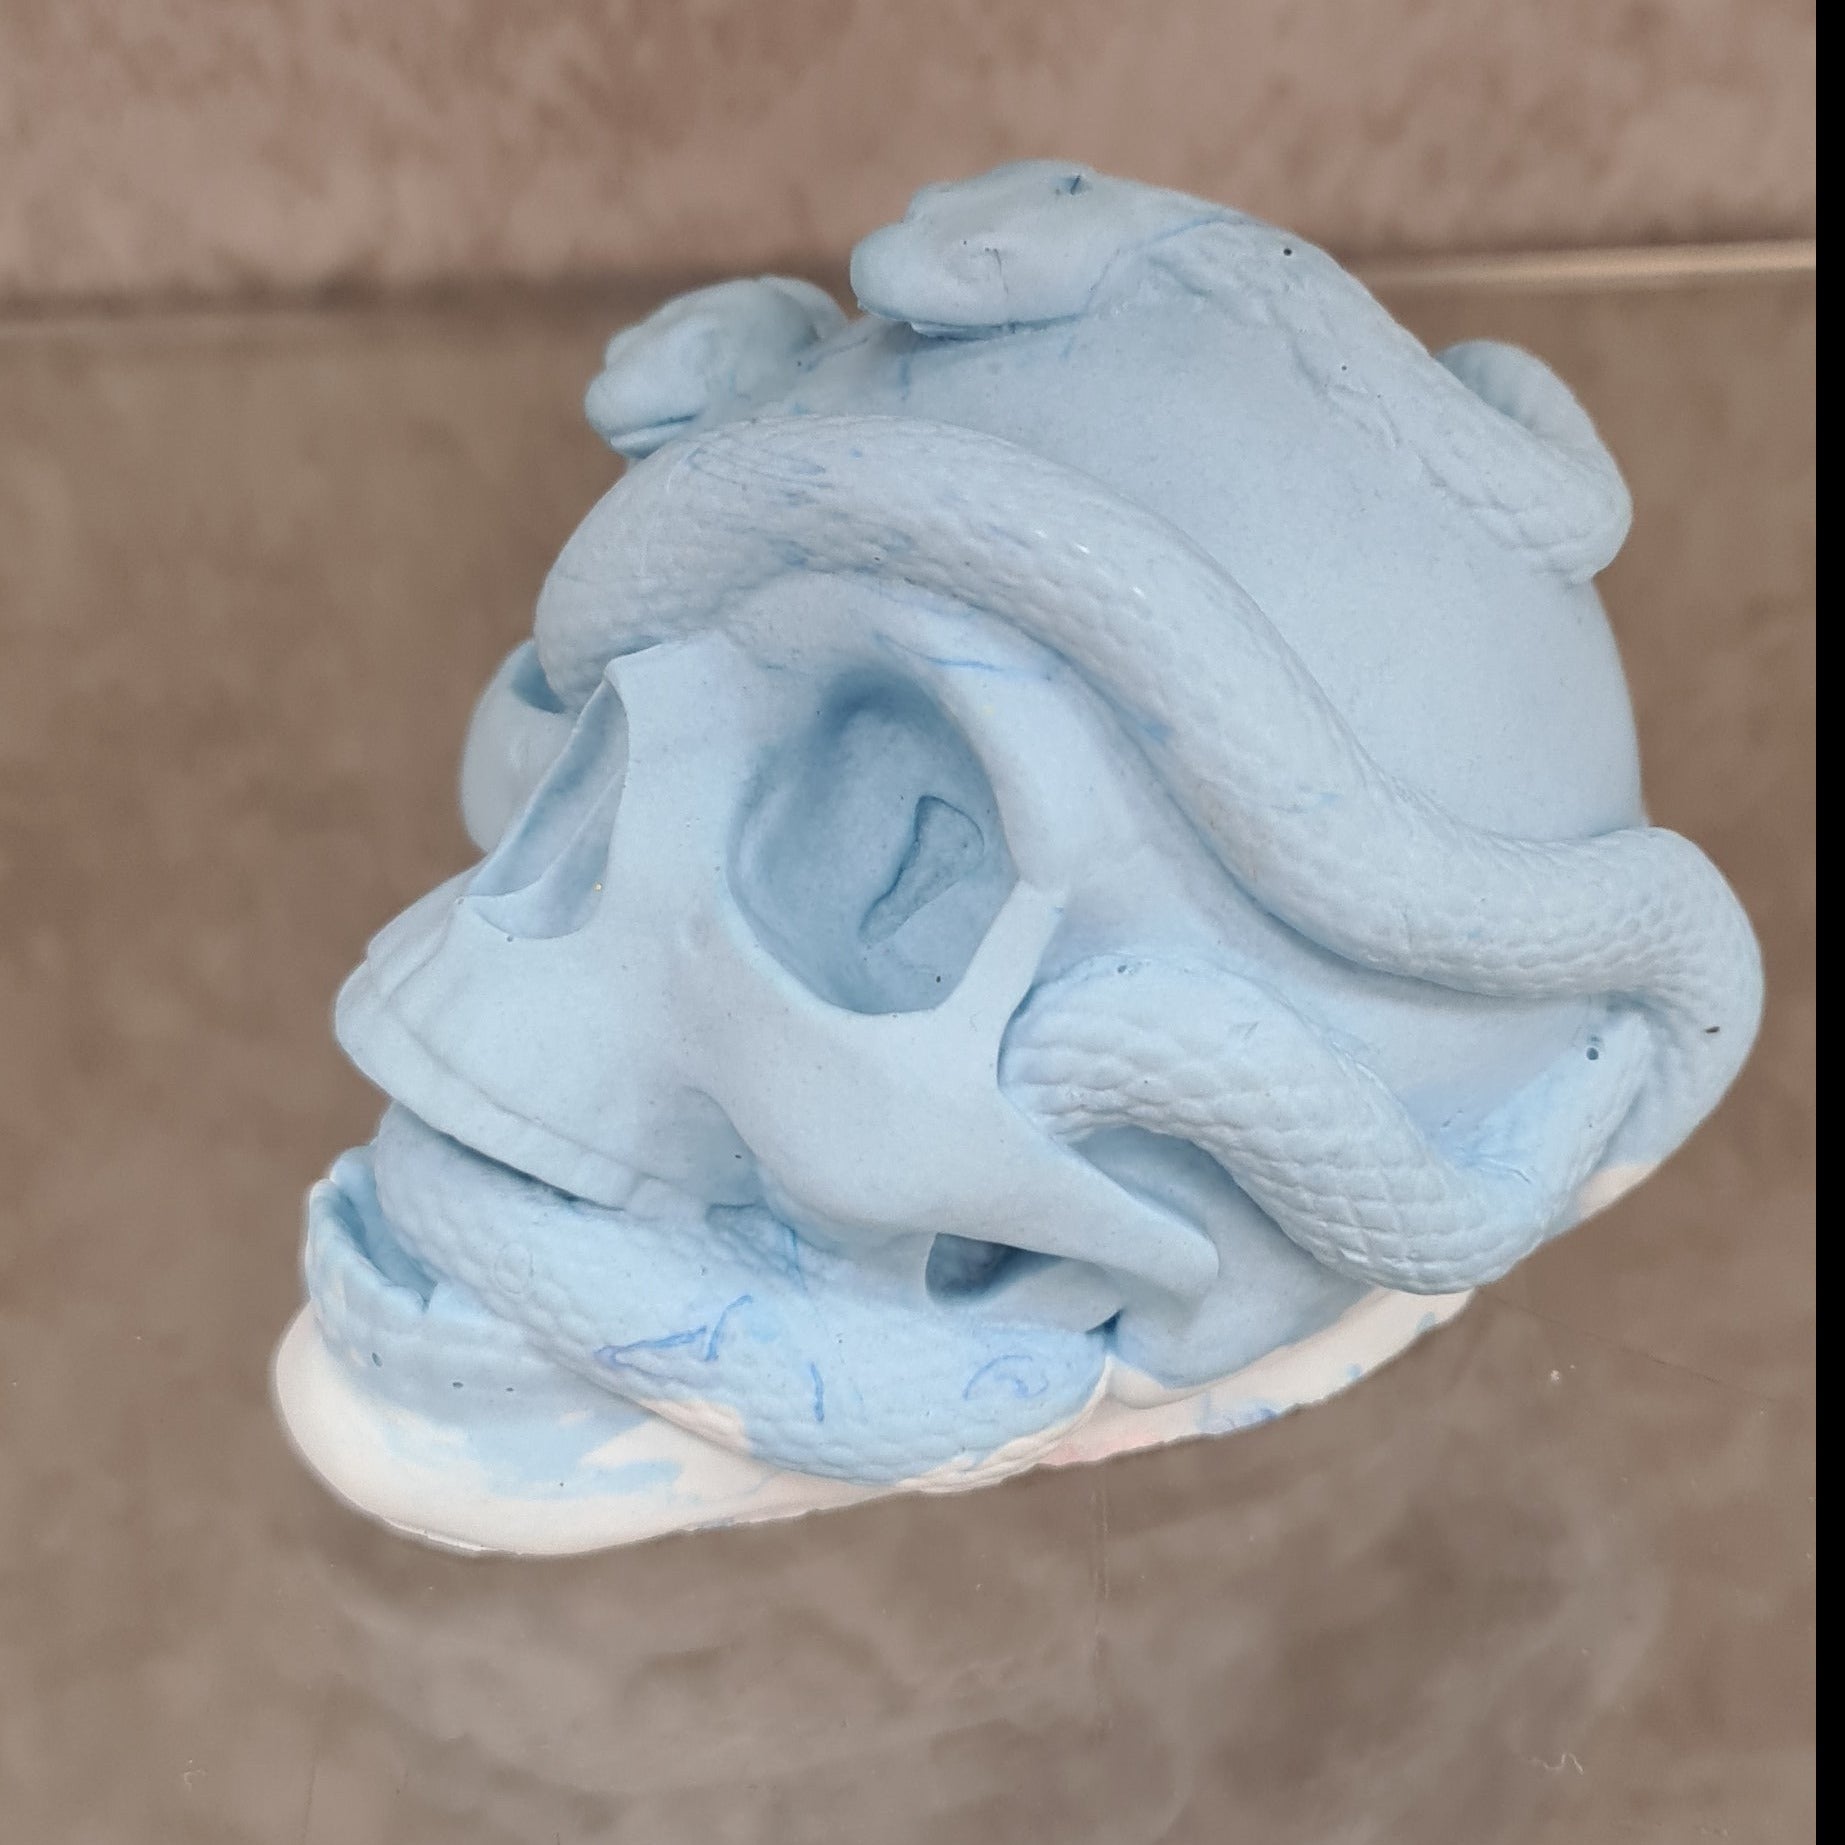 Enchanted Serpent Skull Miniature in Vivid Colors - Eco-Friendly Jesmonite Decor with Magical Serpent Design - Perfect for Indoor and Outdoor Spaces